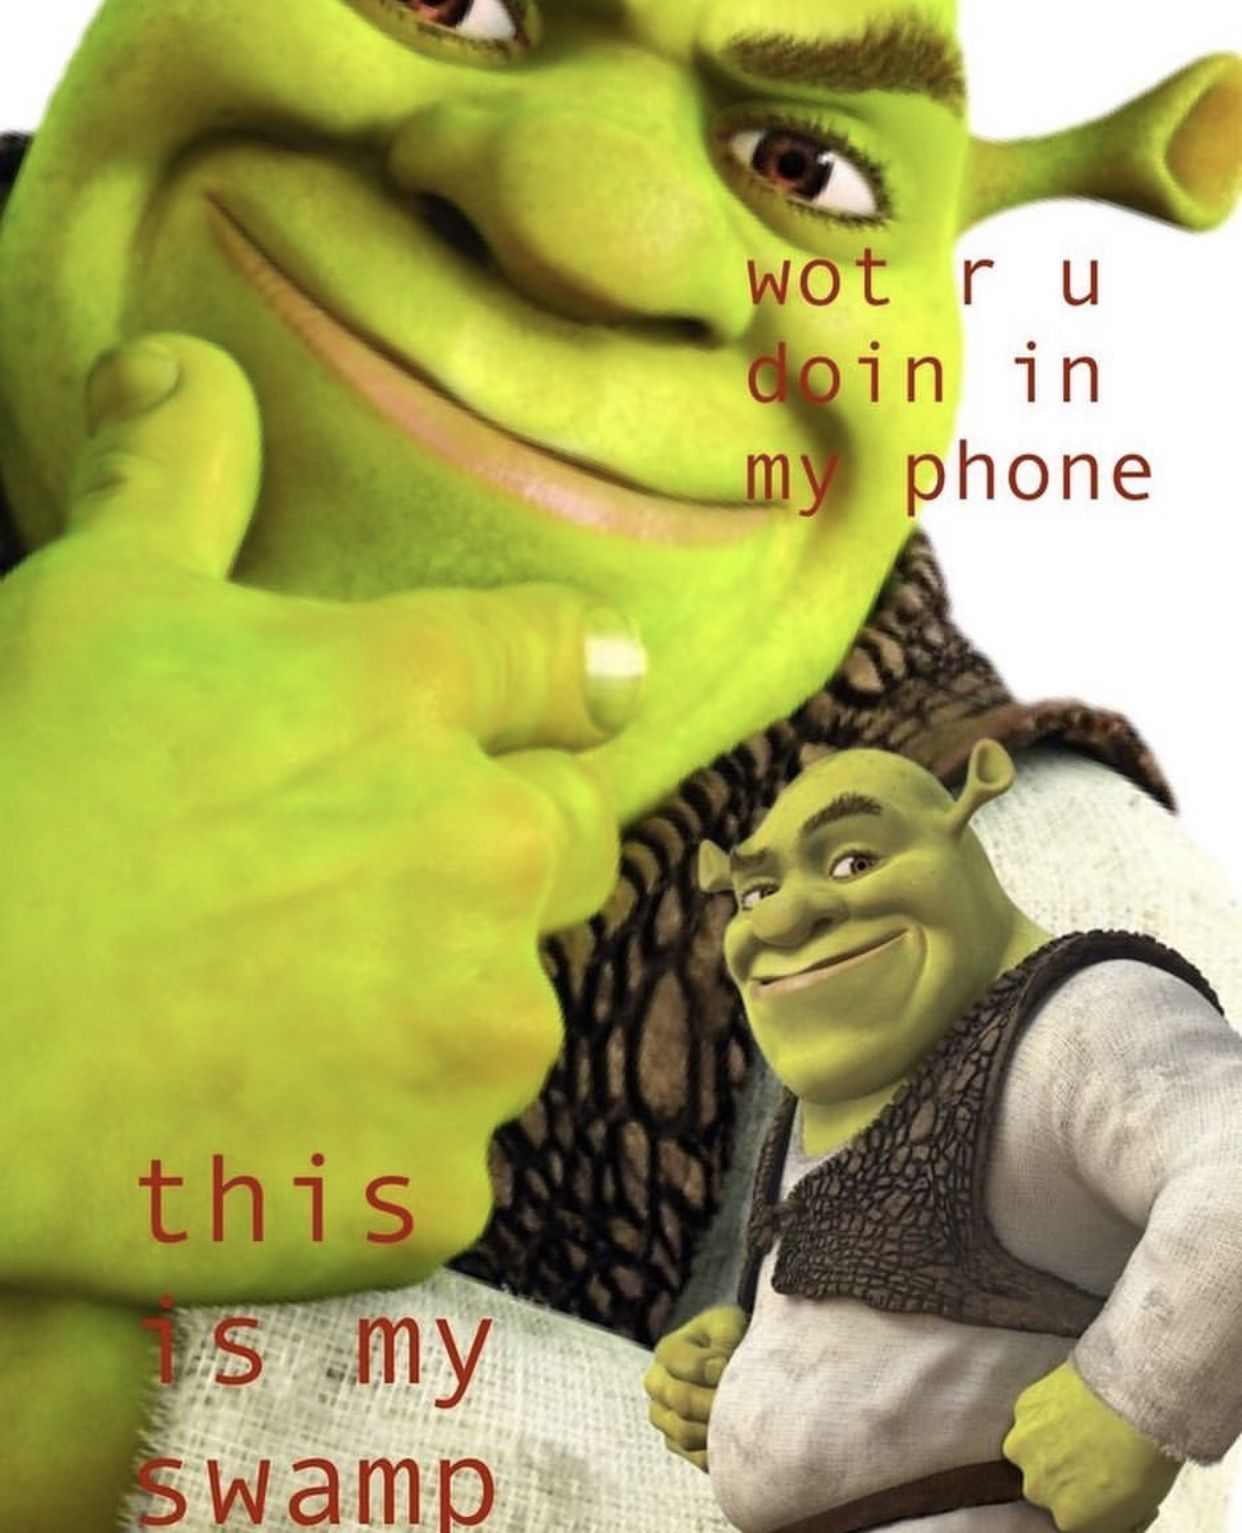 A picture of two green characters with the words this is my swamp - Shrek